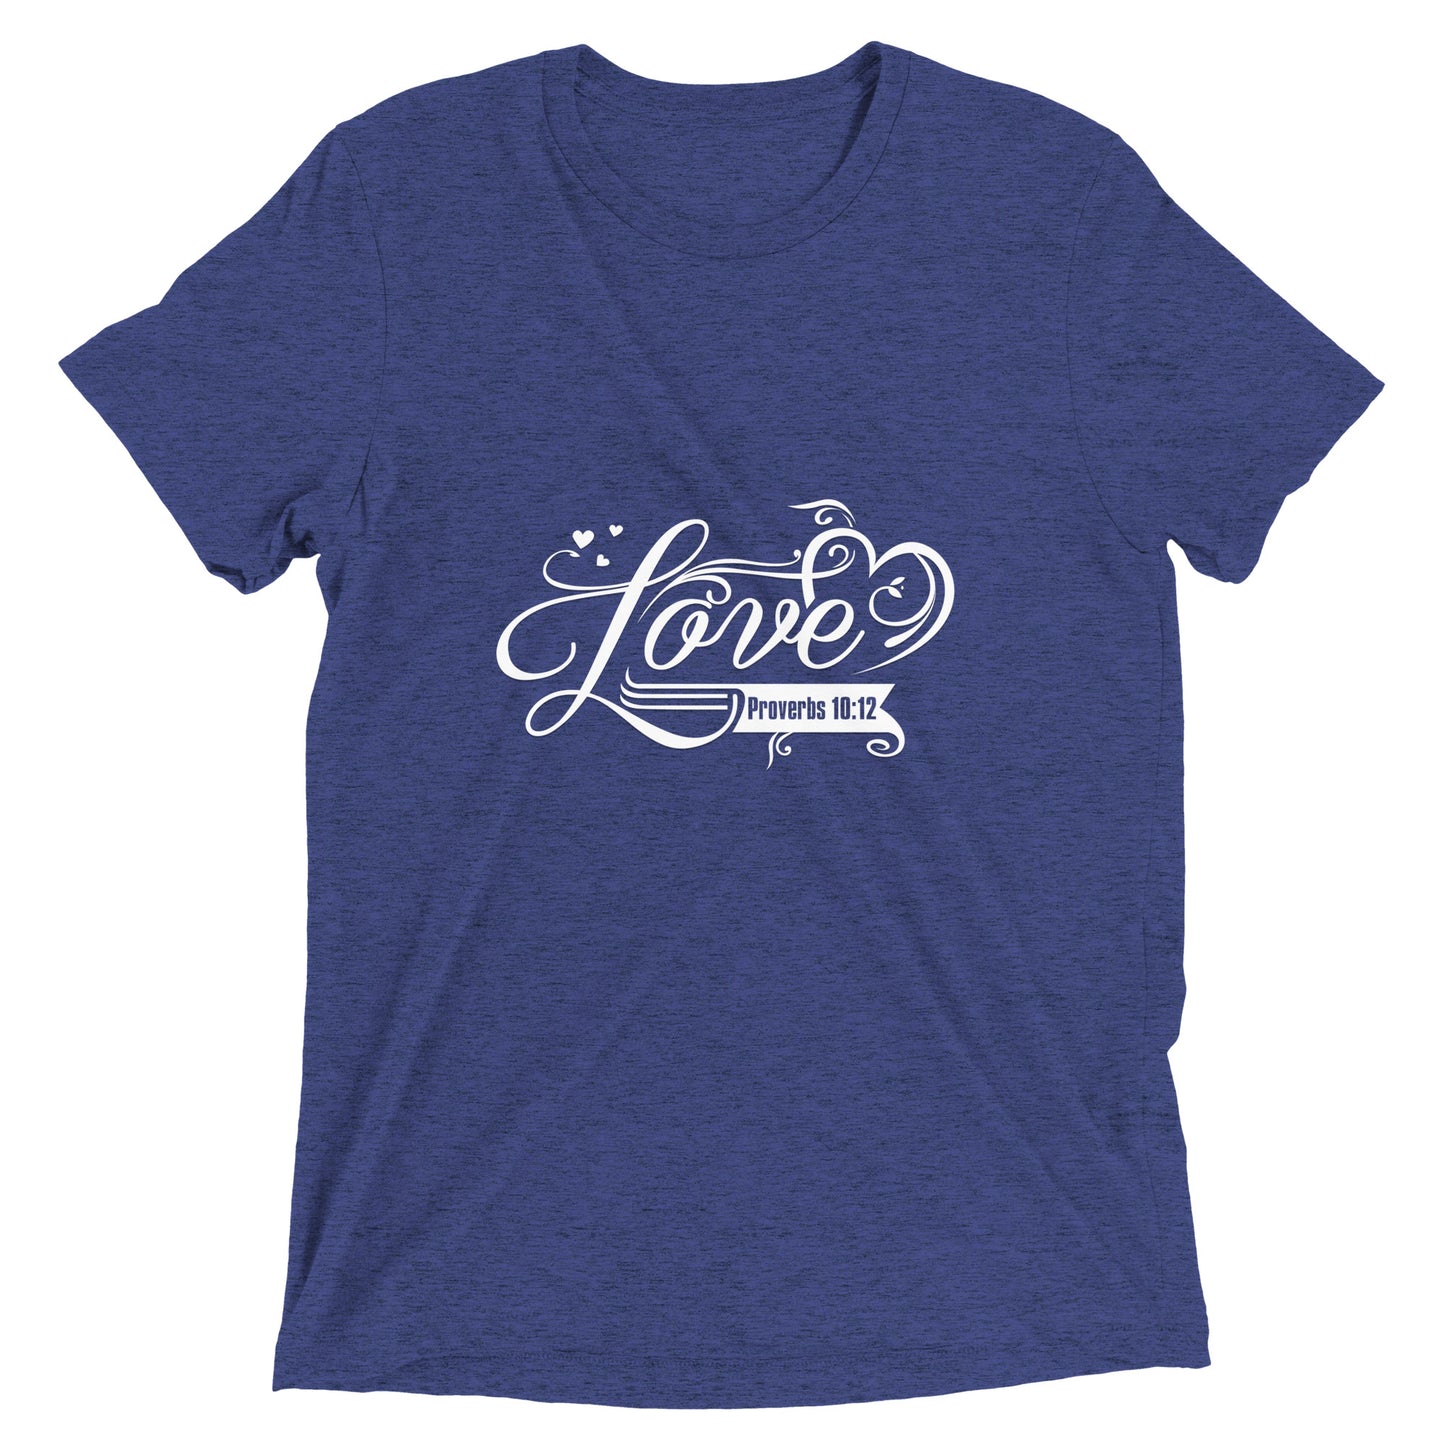 Love - Short sleeve t-shirt - View All Colors